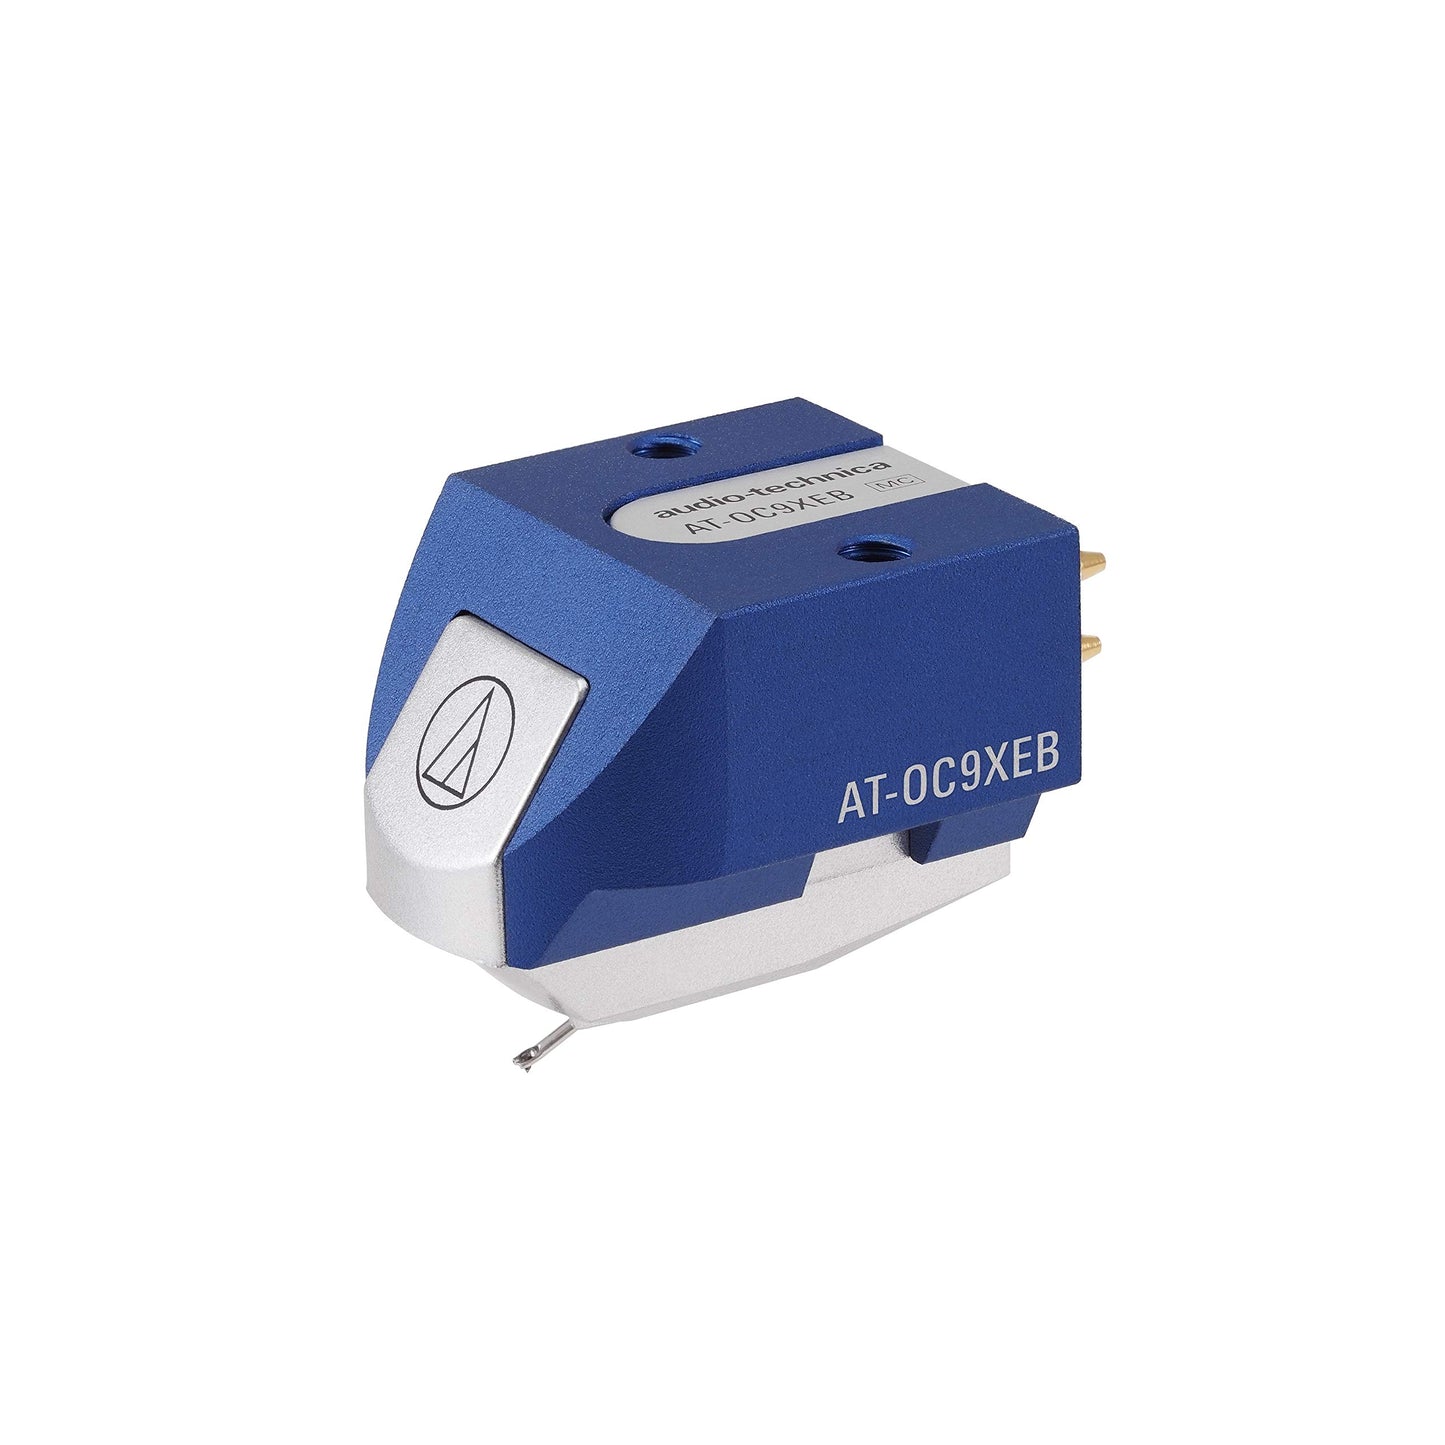 Audio-Technica AT-OC9XEB Dual Moving Coil Cartridge with Bonded Elliptical Stylus